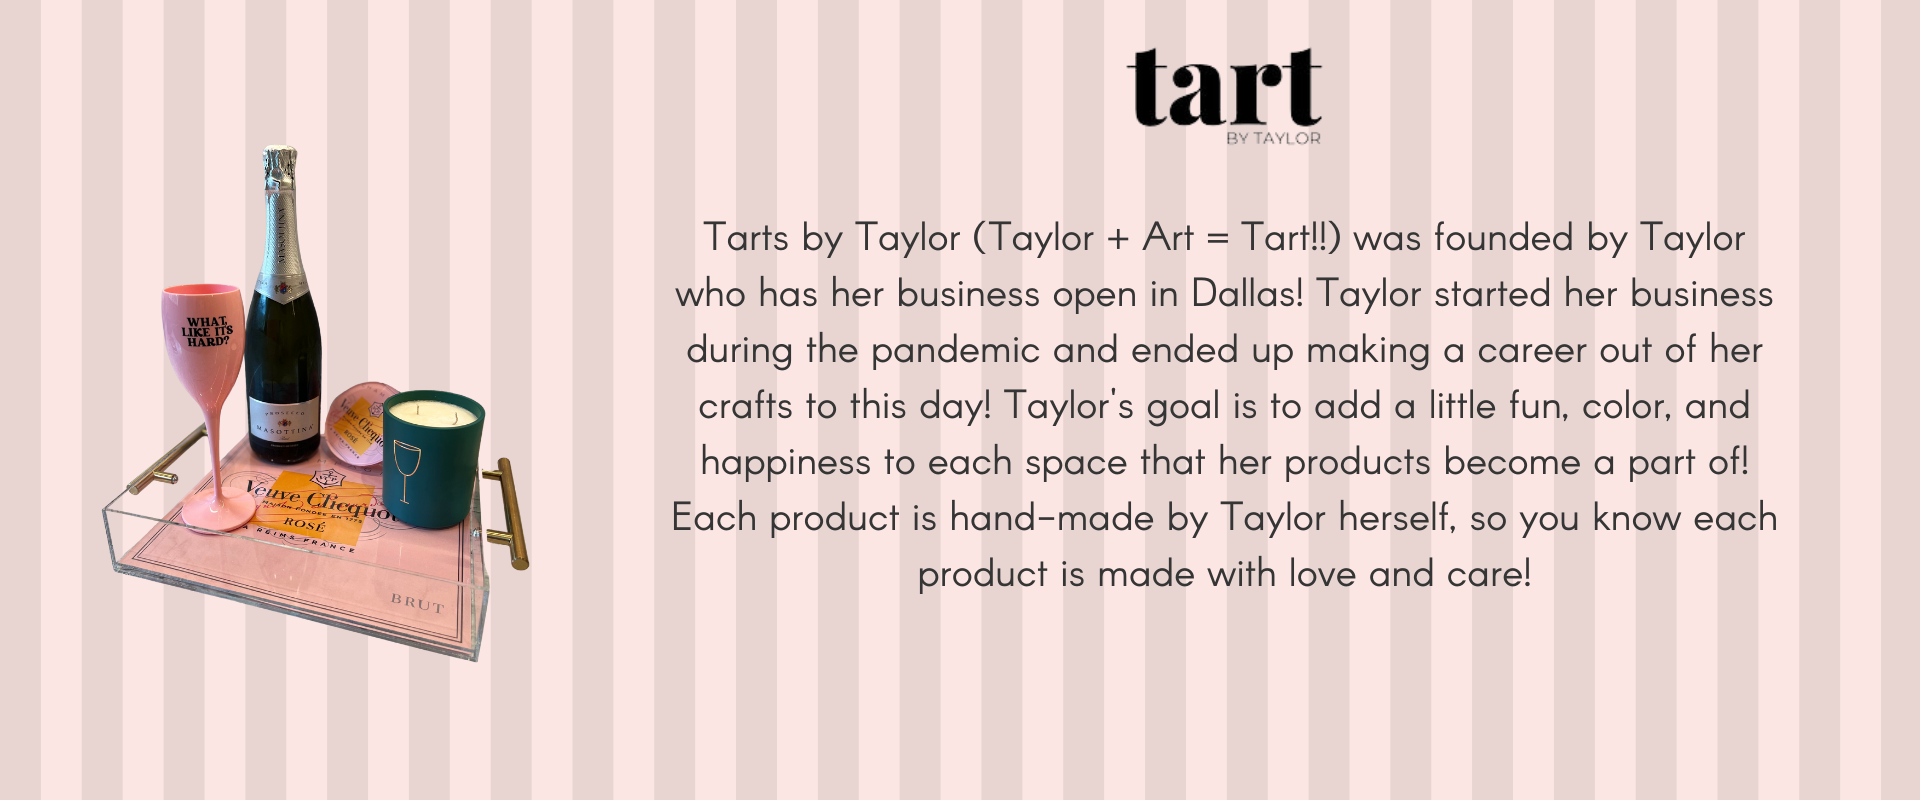 Tart by Taylor company description. Taylor makes each product on order so you know each order will be made with love and care, on top of being unique!